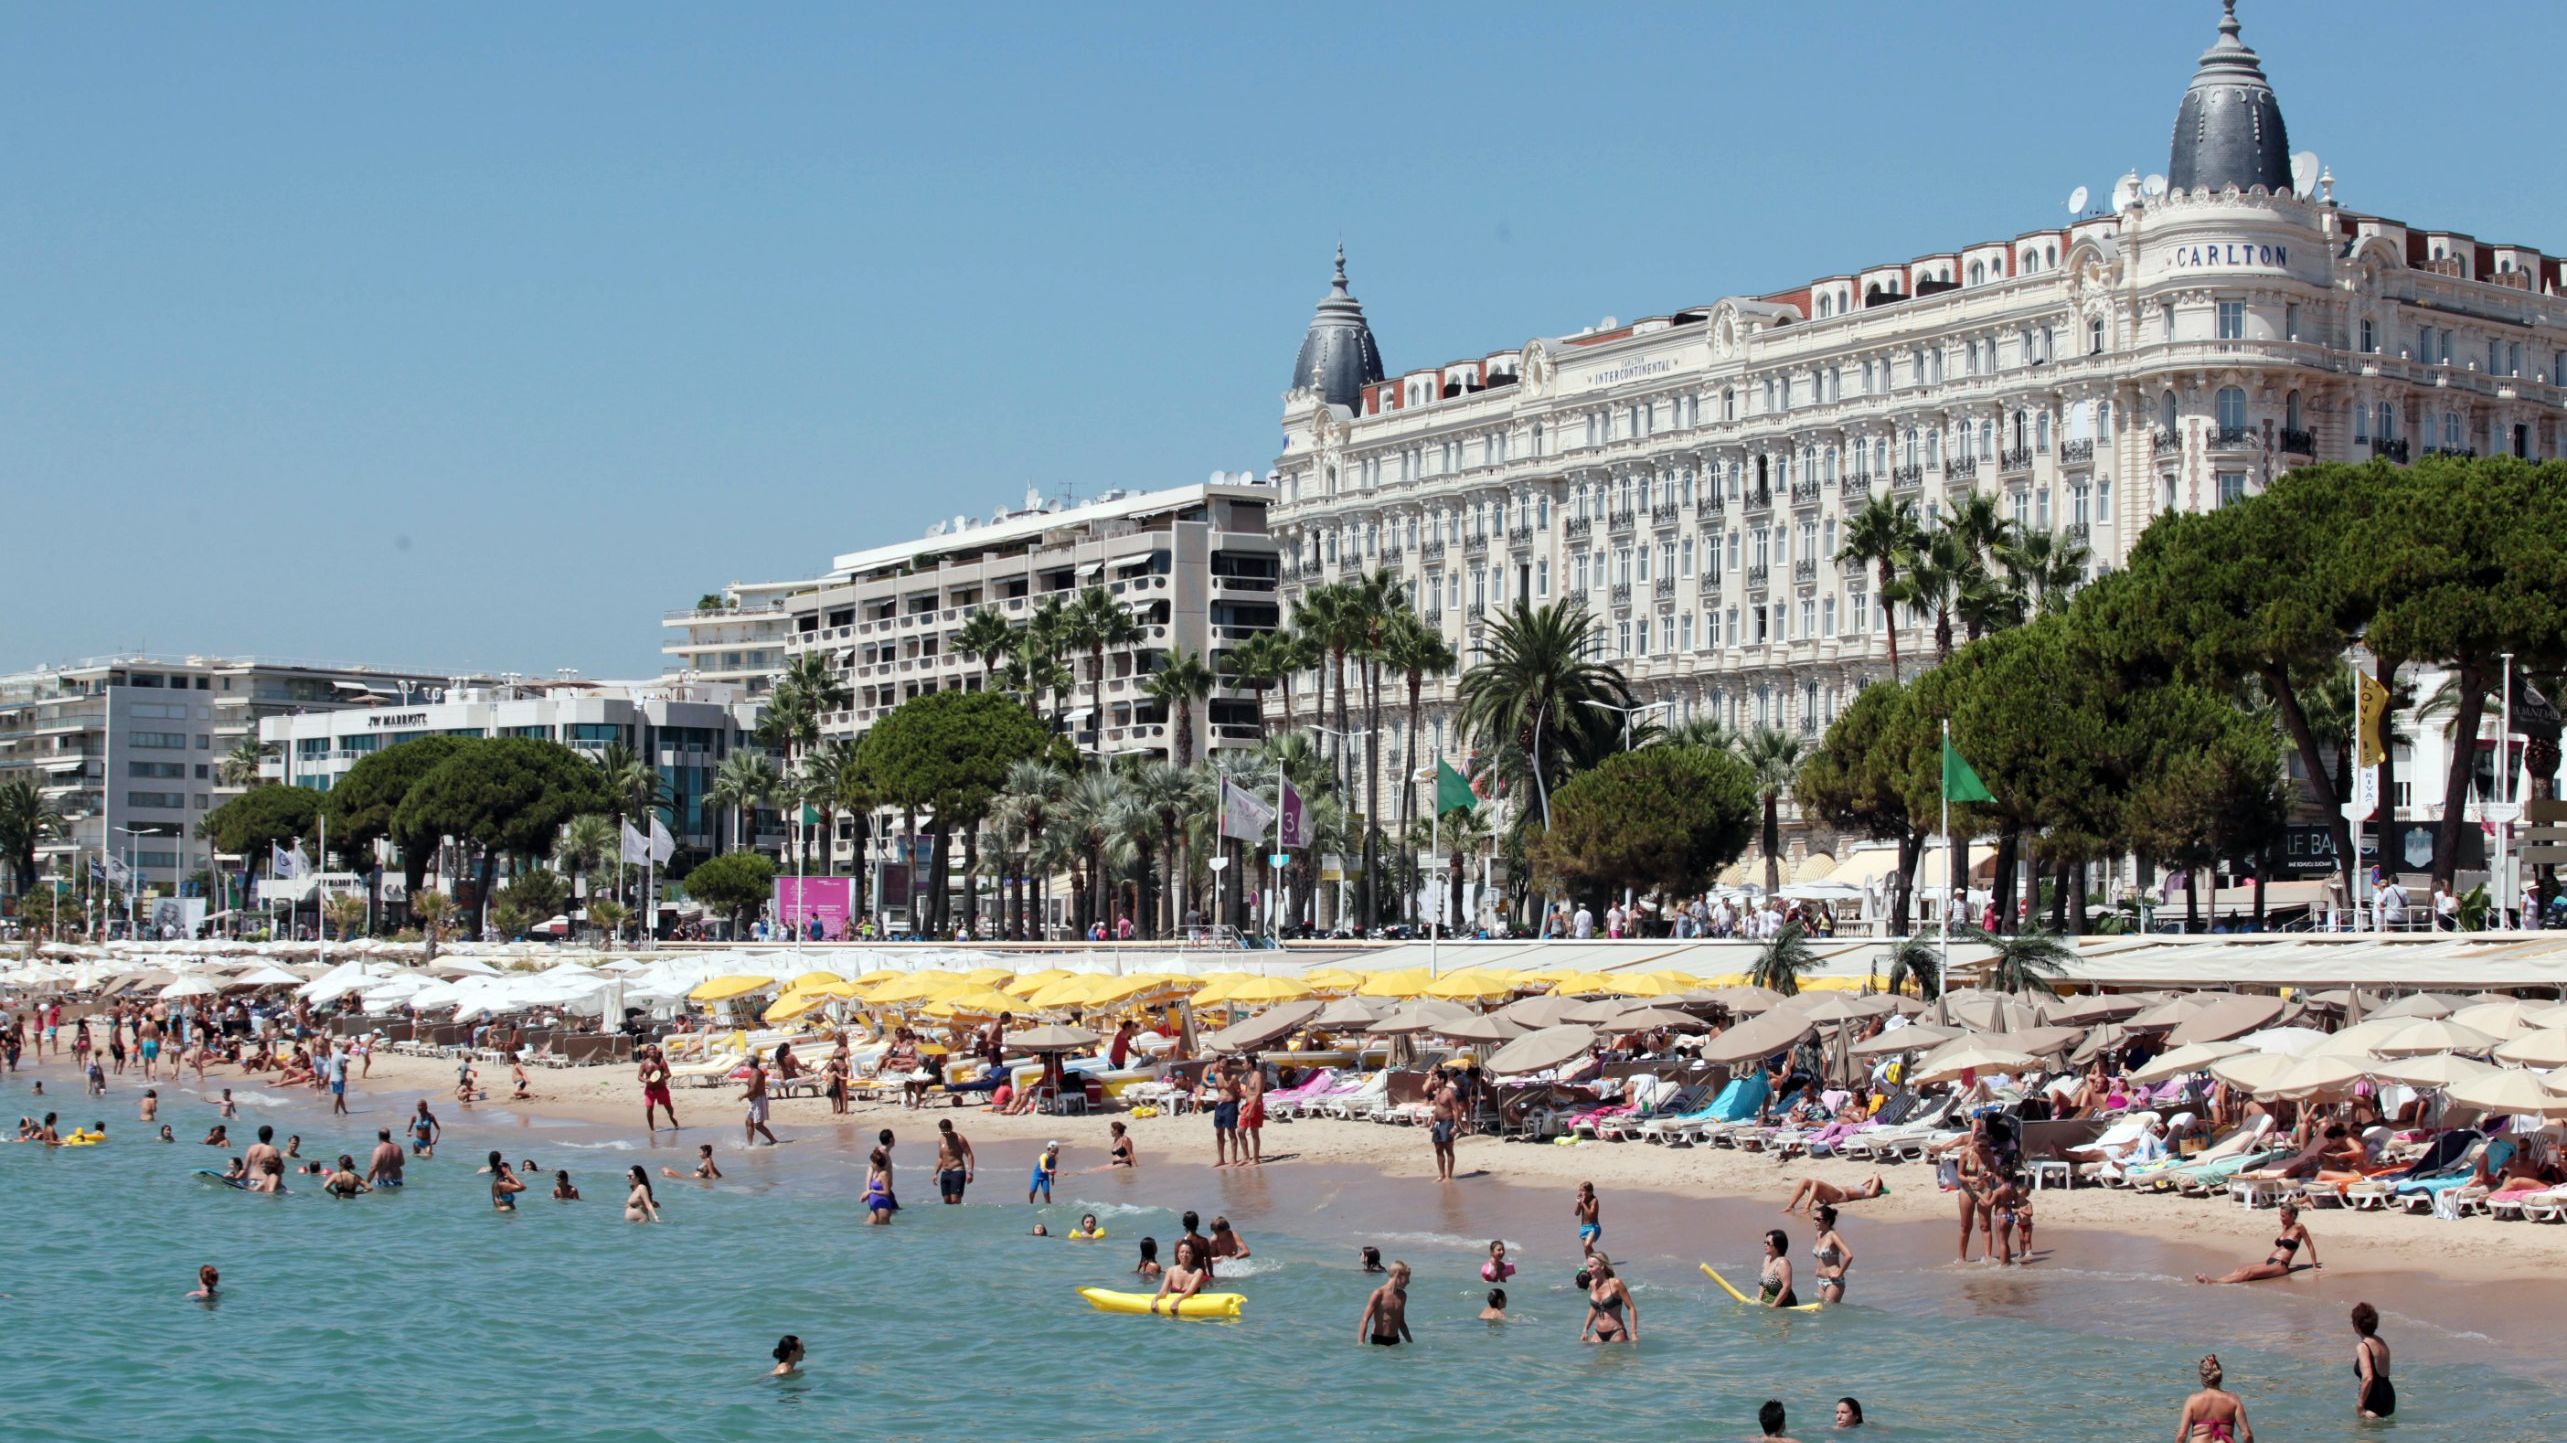 People frolic in the water at a beach in Cannes in August 2012.